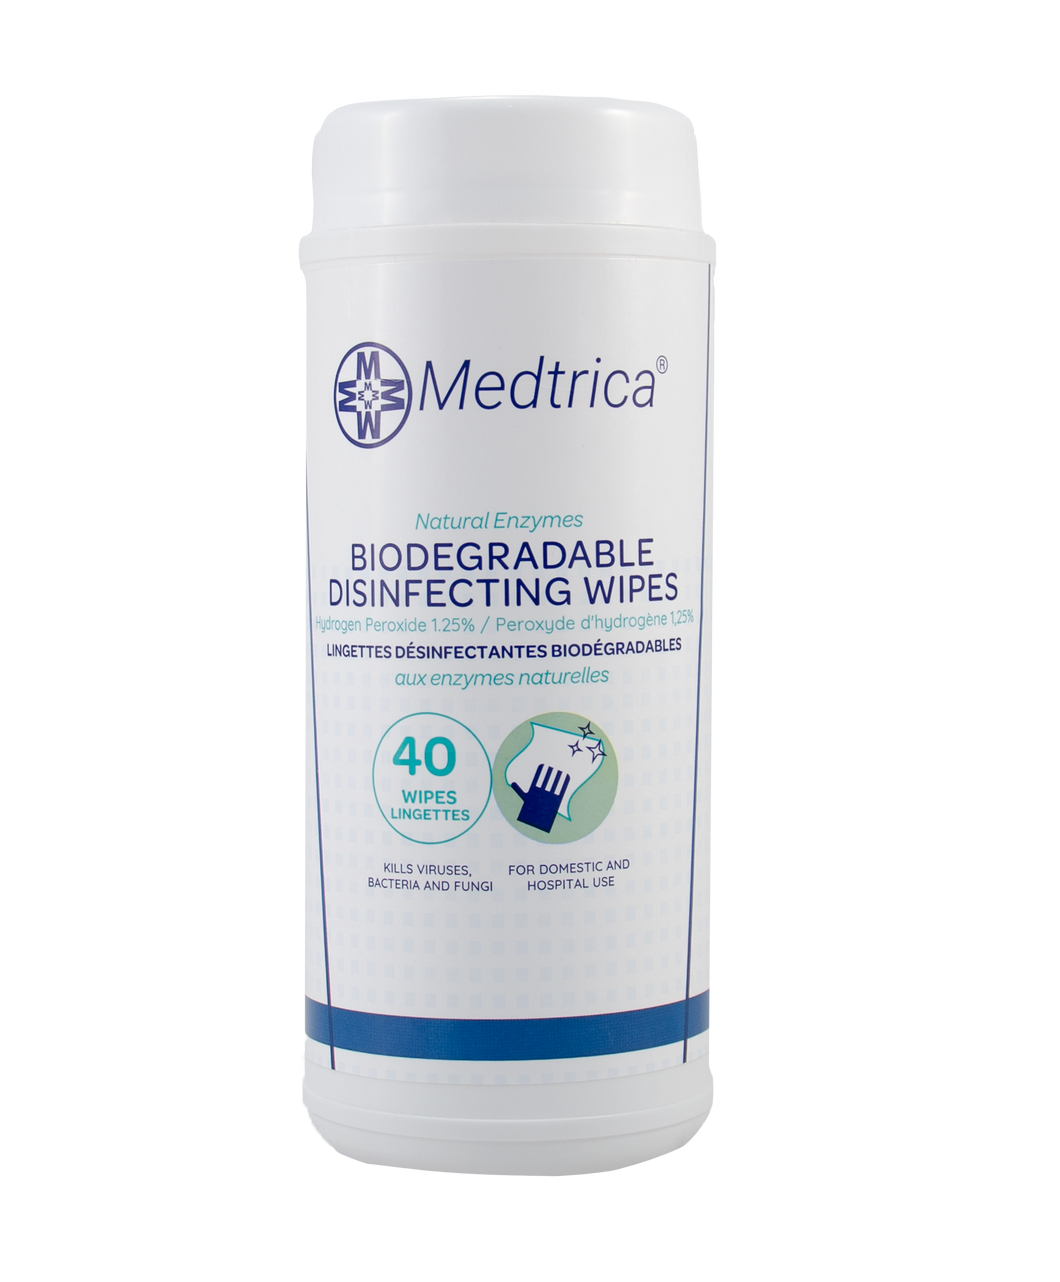 Biodegradable Disinfecting Wipes